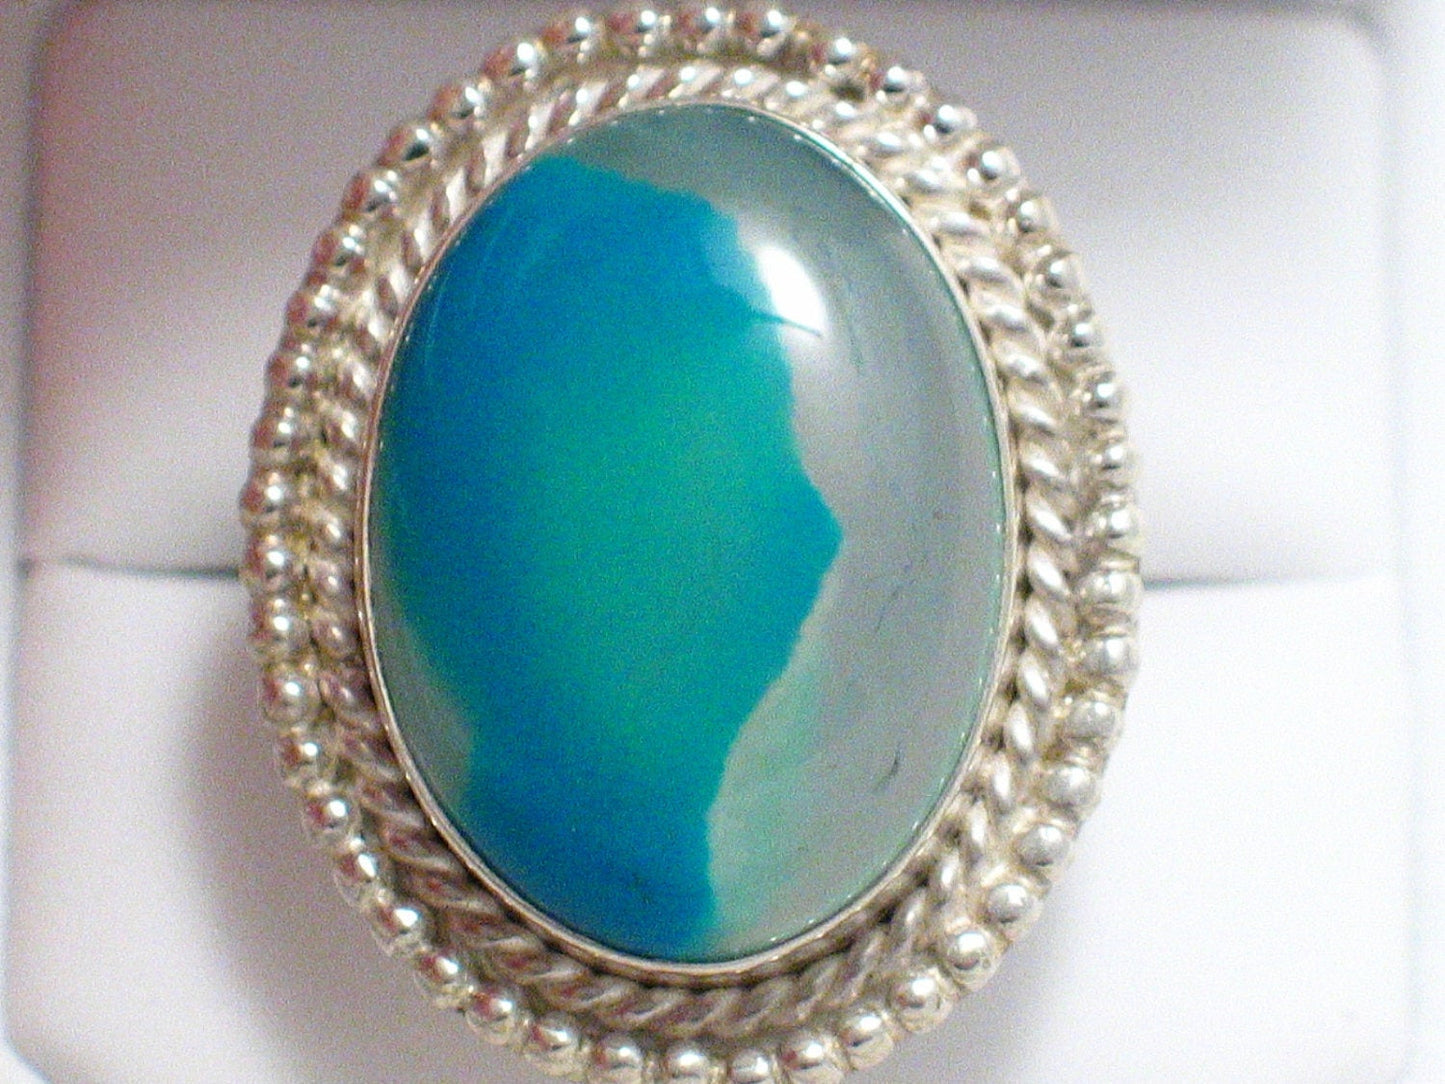 Stone Ring, Sterling Silver sz6.5 Big Chunky Style Oval Blue White Agate Statement Ring - Blingschlingers Jewelry